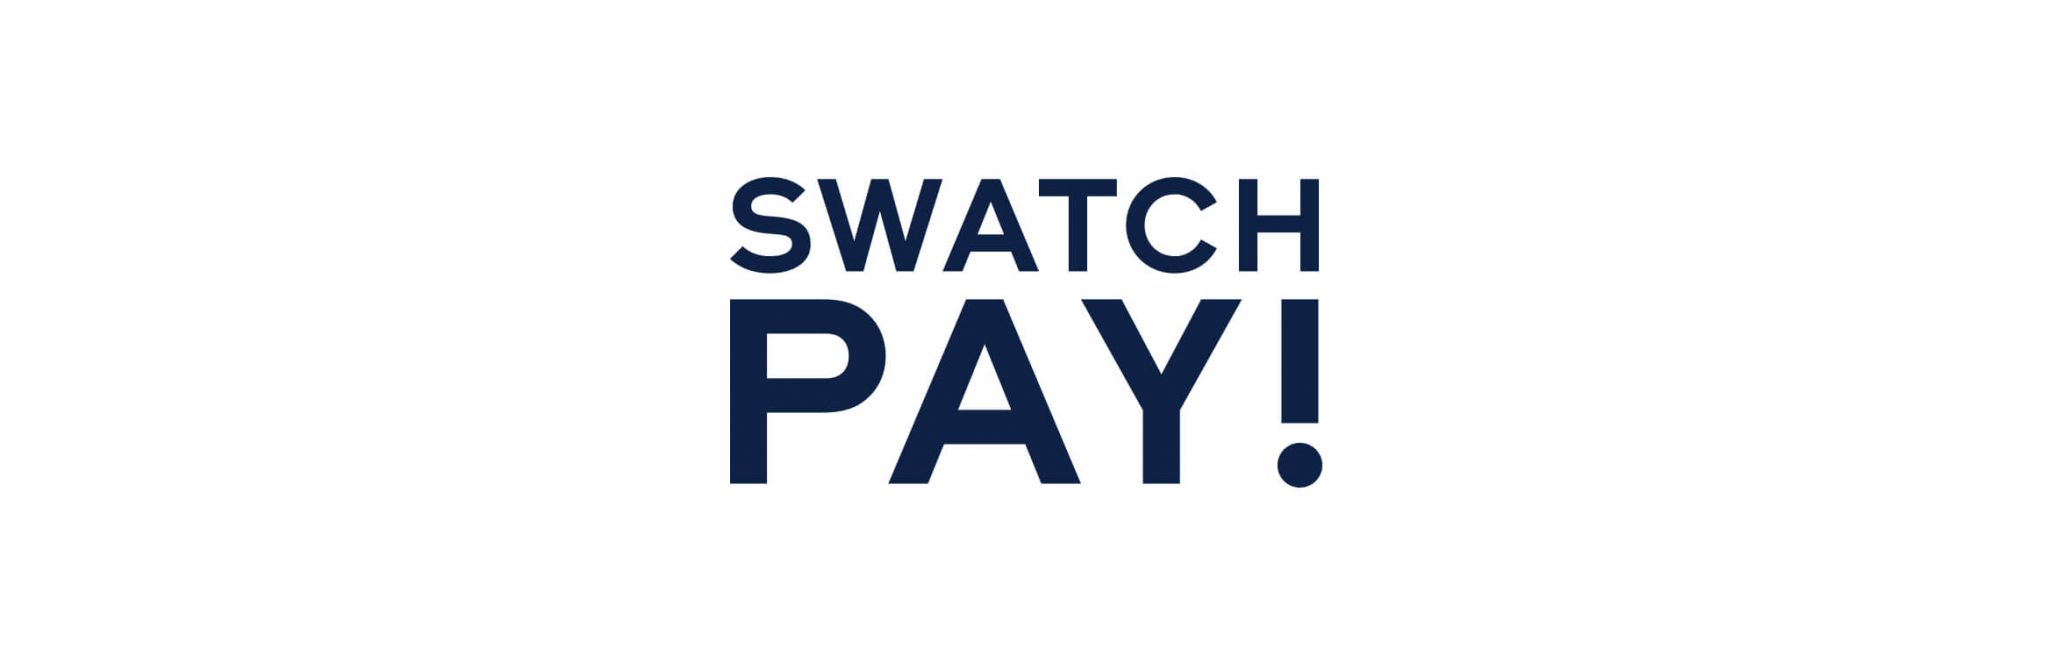 mobile_wallets_swatch_pay.jpg